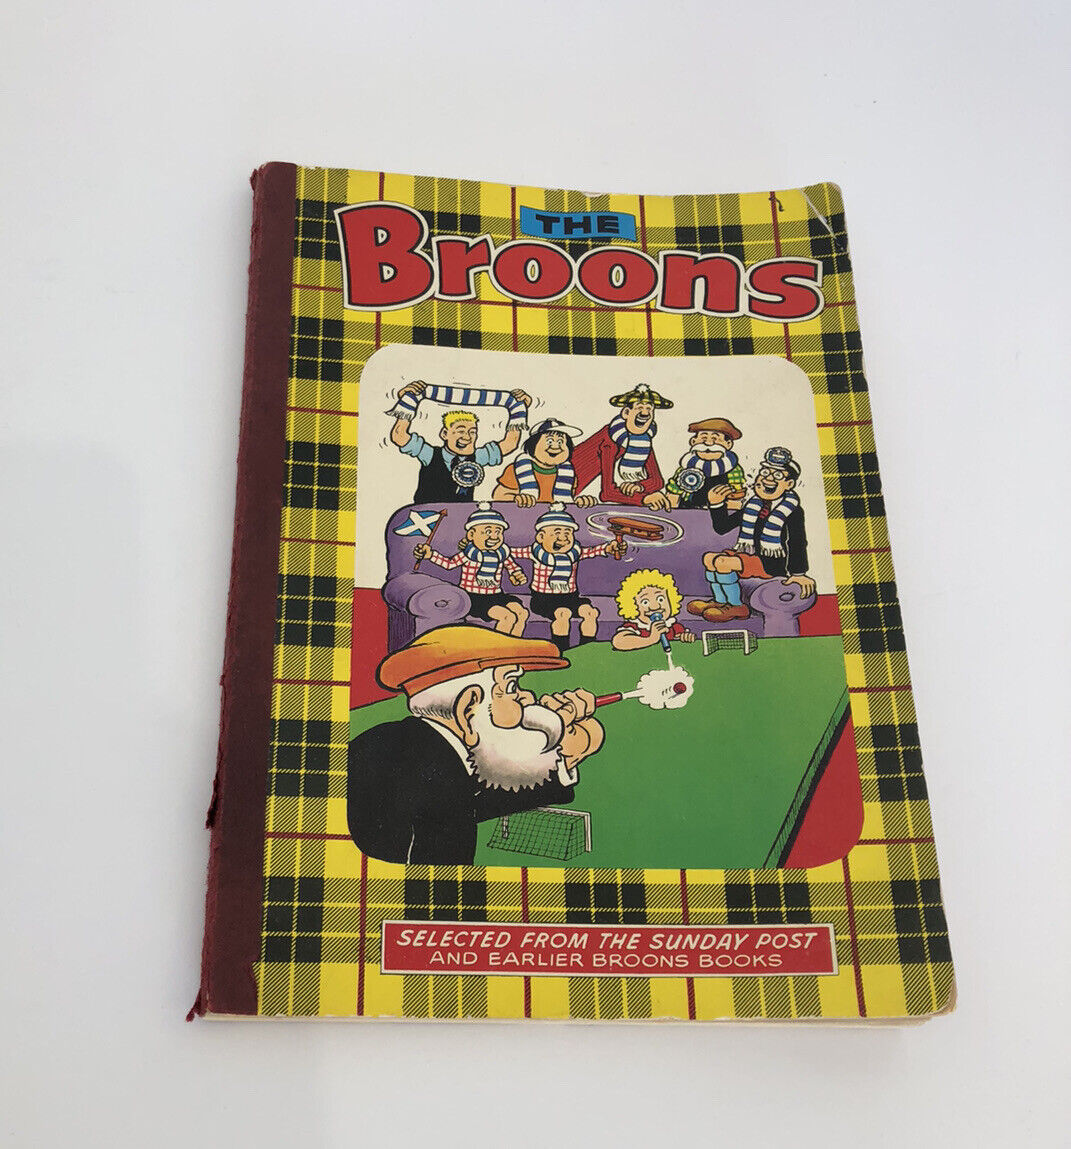 Vintage The Broons Selected From The Sunday Post and Earlier Broons Books 1979